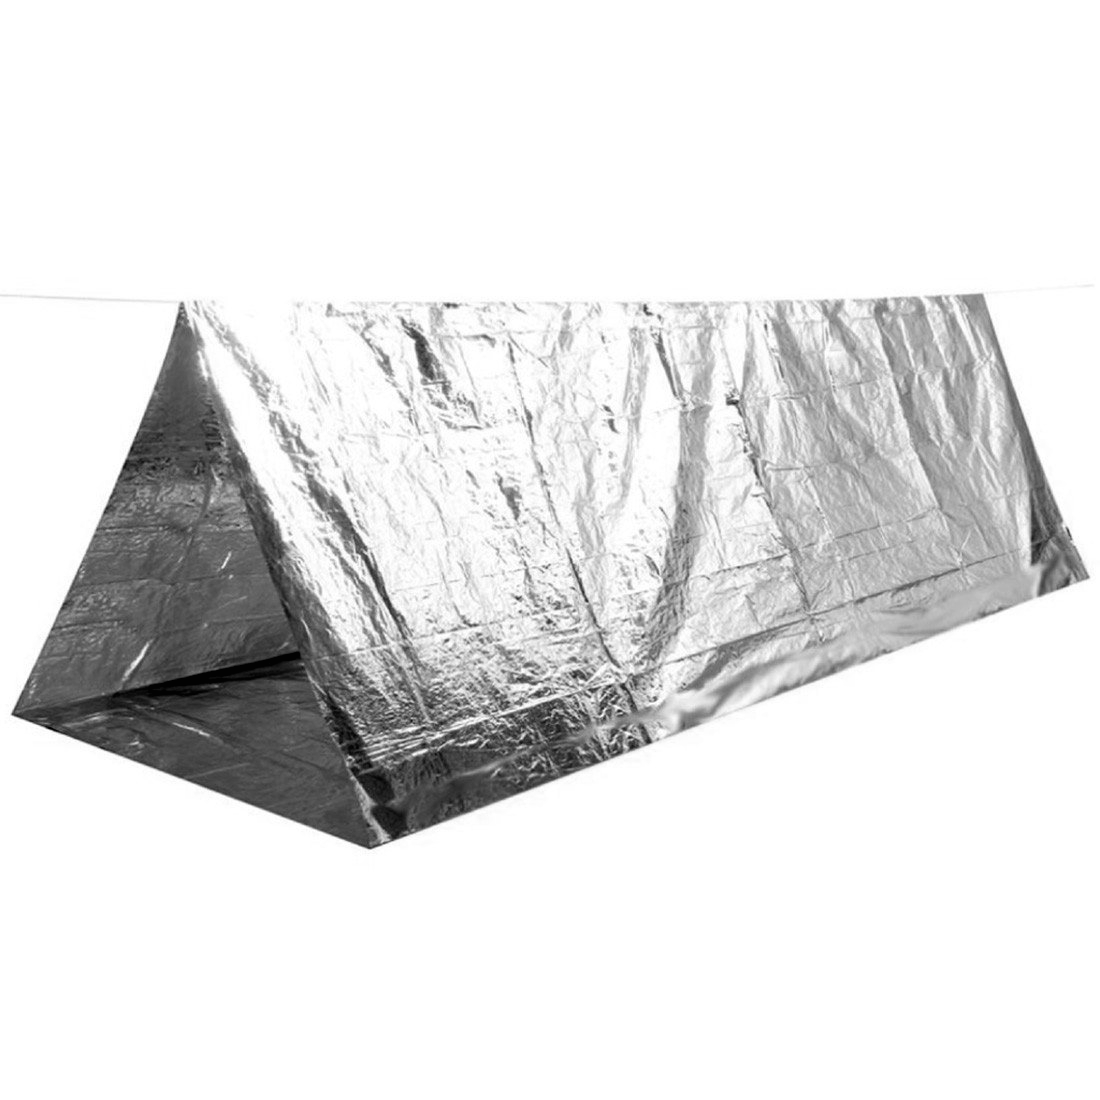 Military Thermal Survival Shelter